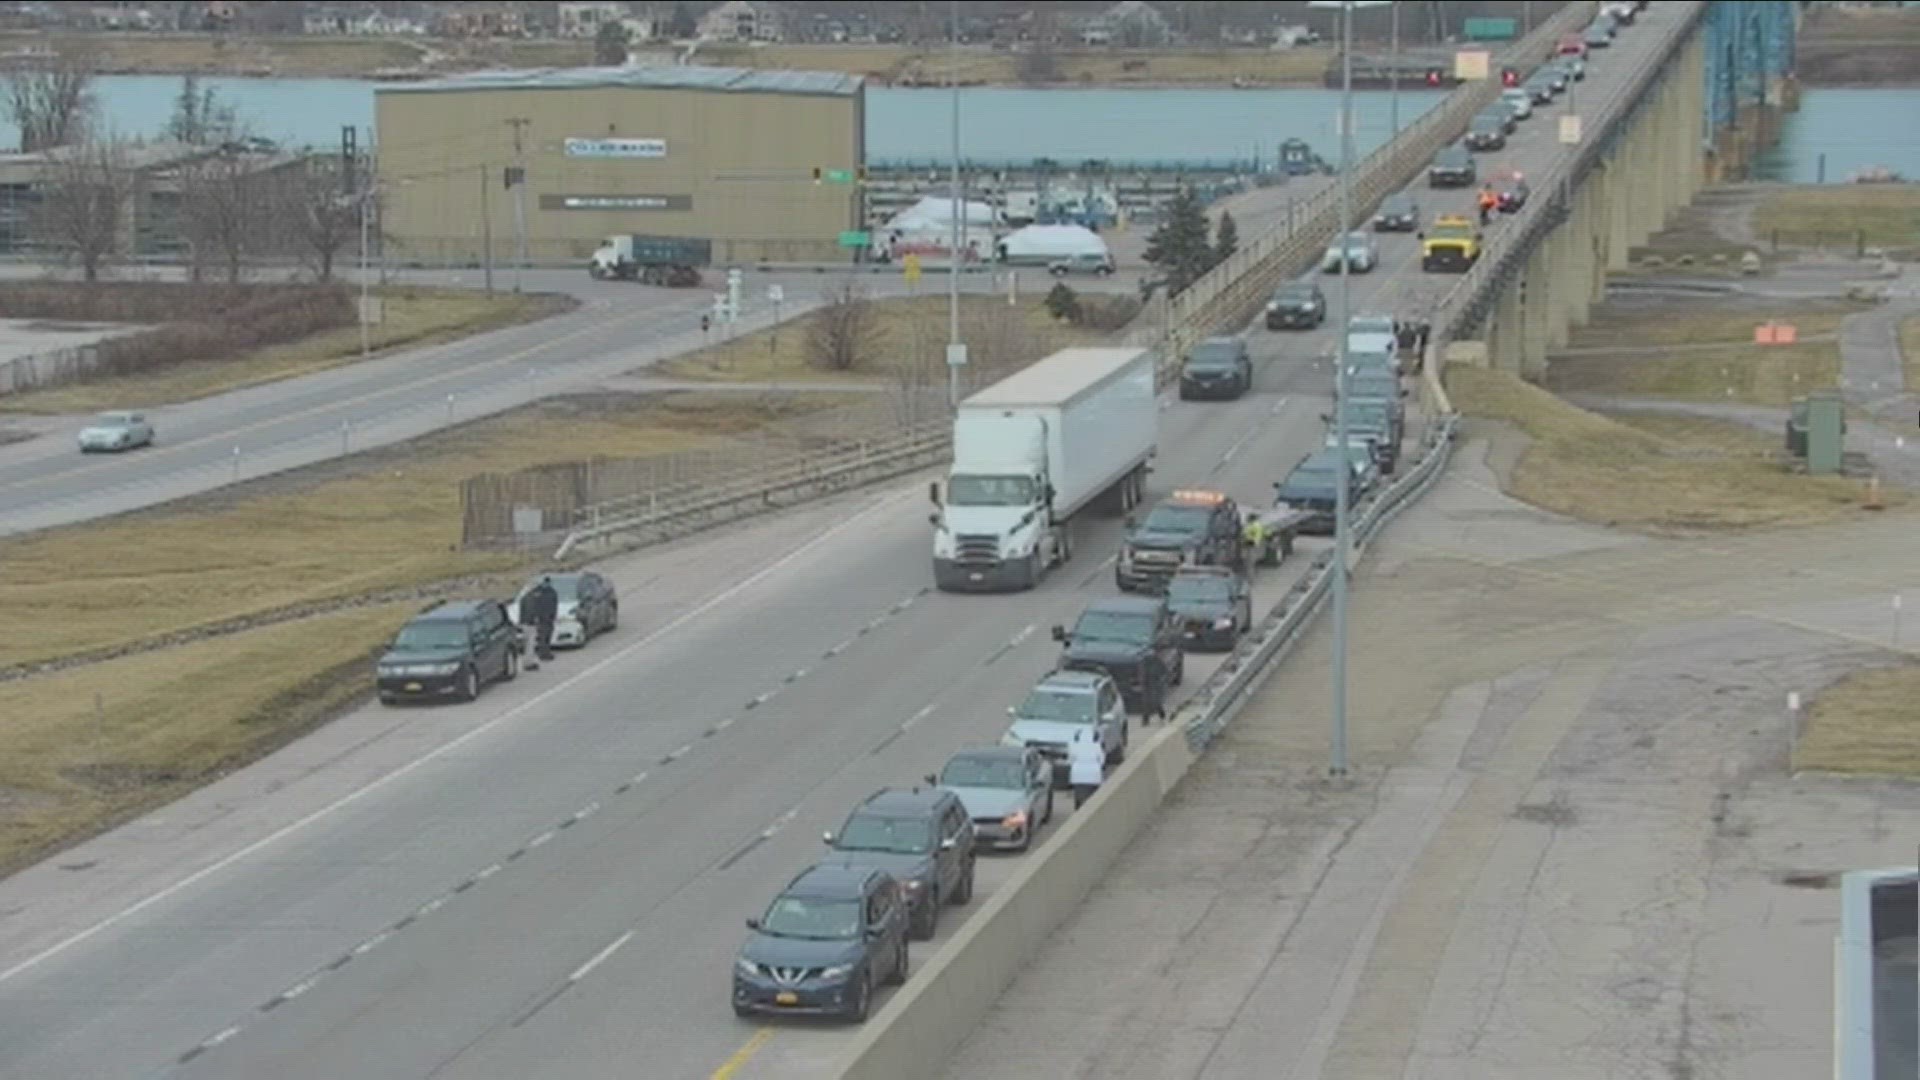 After clearing a crash on the South Grand Island Bridge ... there was another crash involving 12 vehicles at the bottom of the Bridge this was at 8-30 this morning